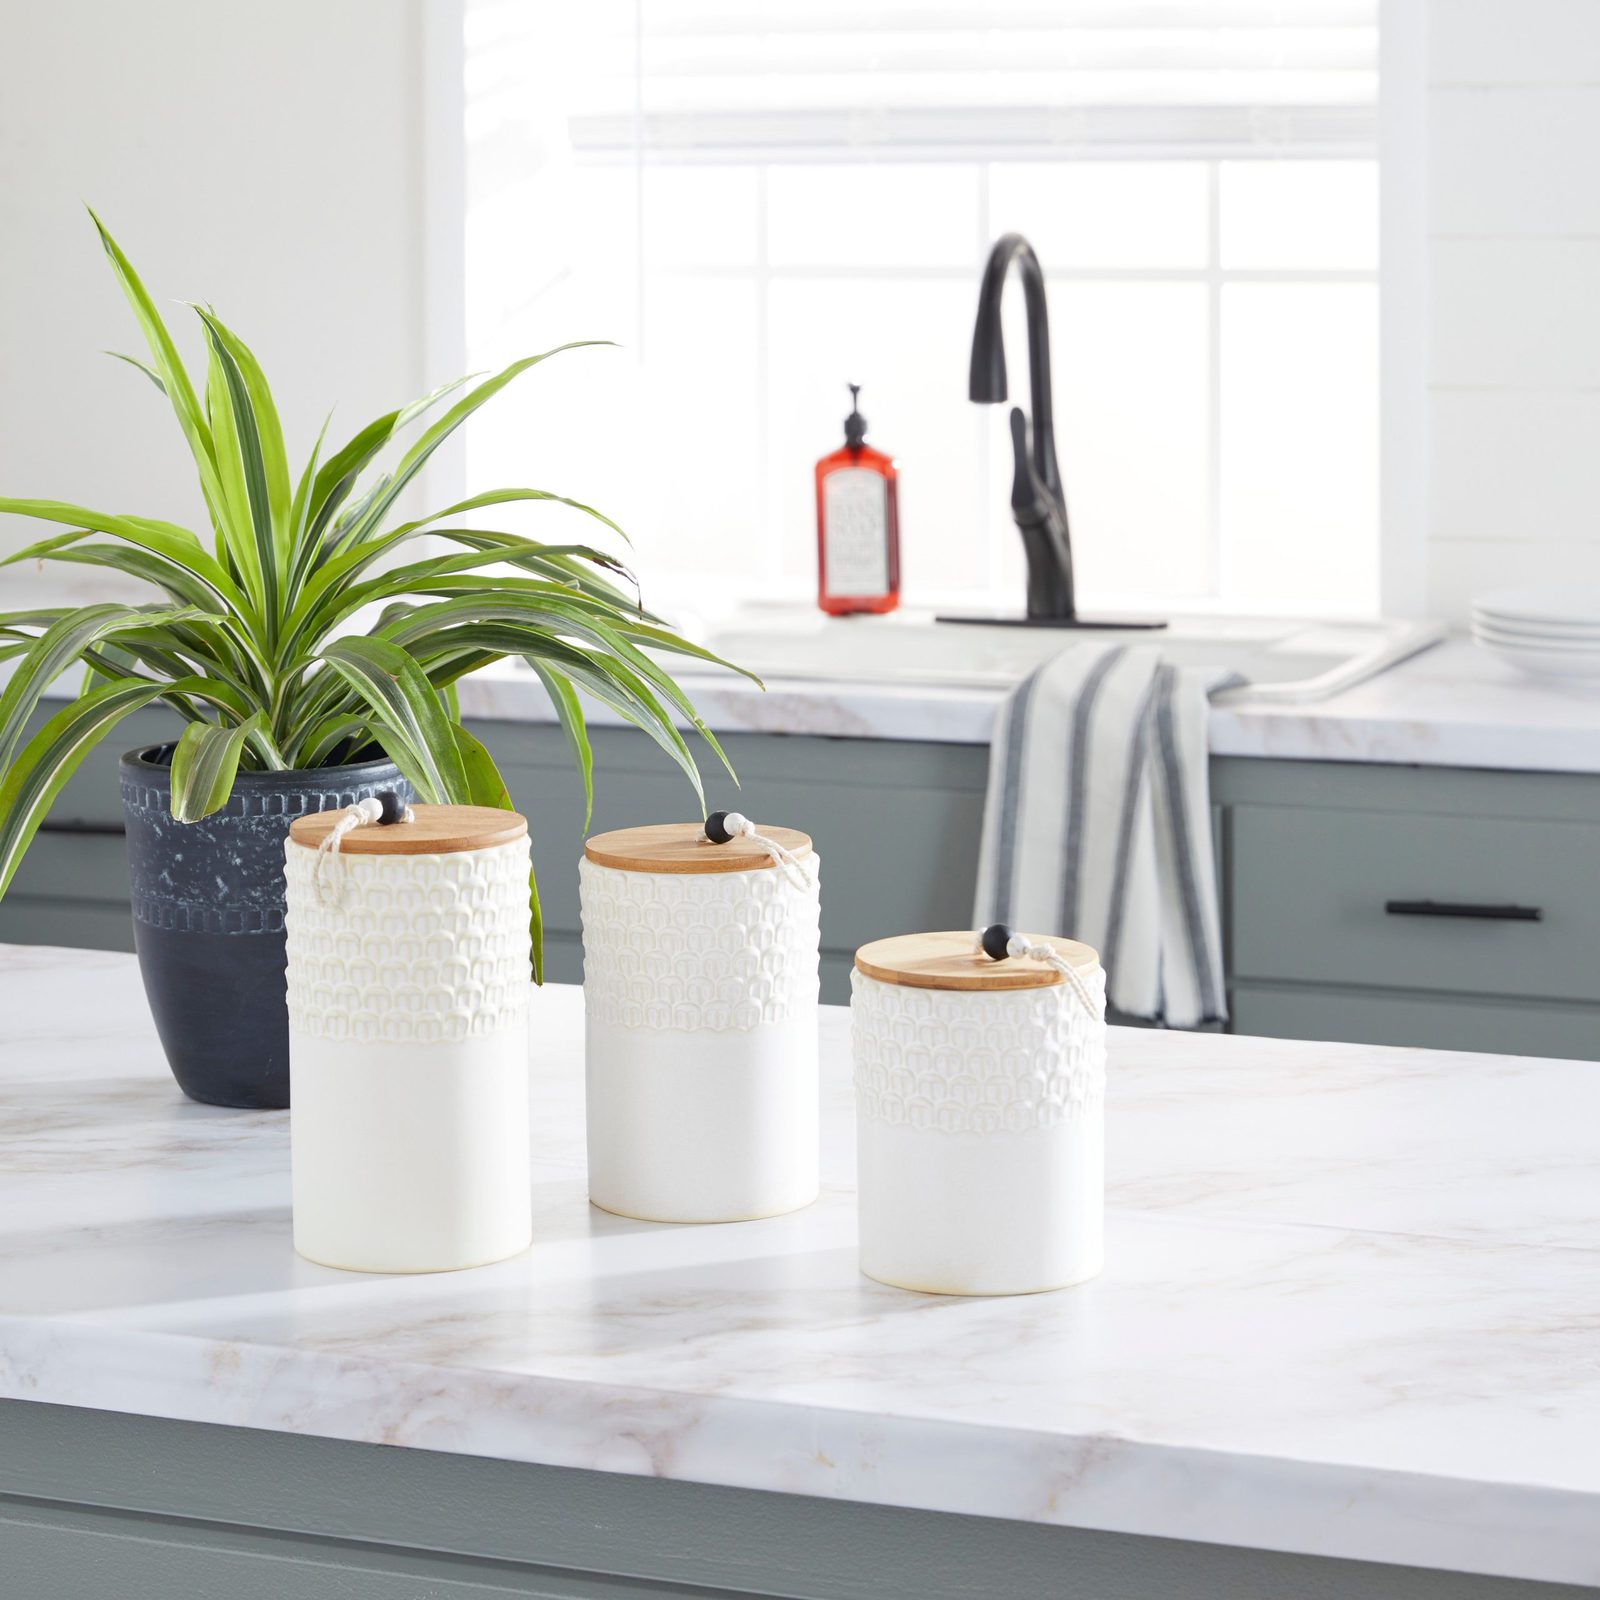 Add Country Flair with White Canisters